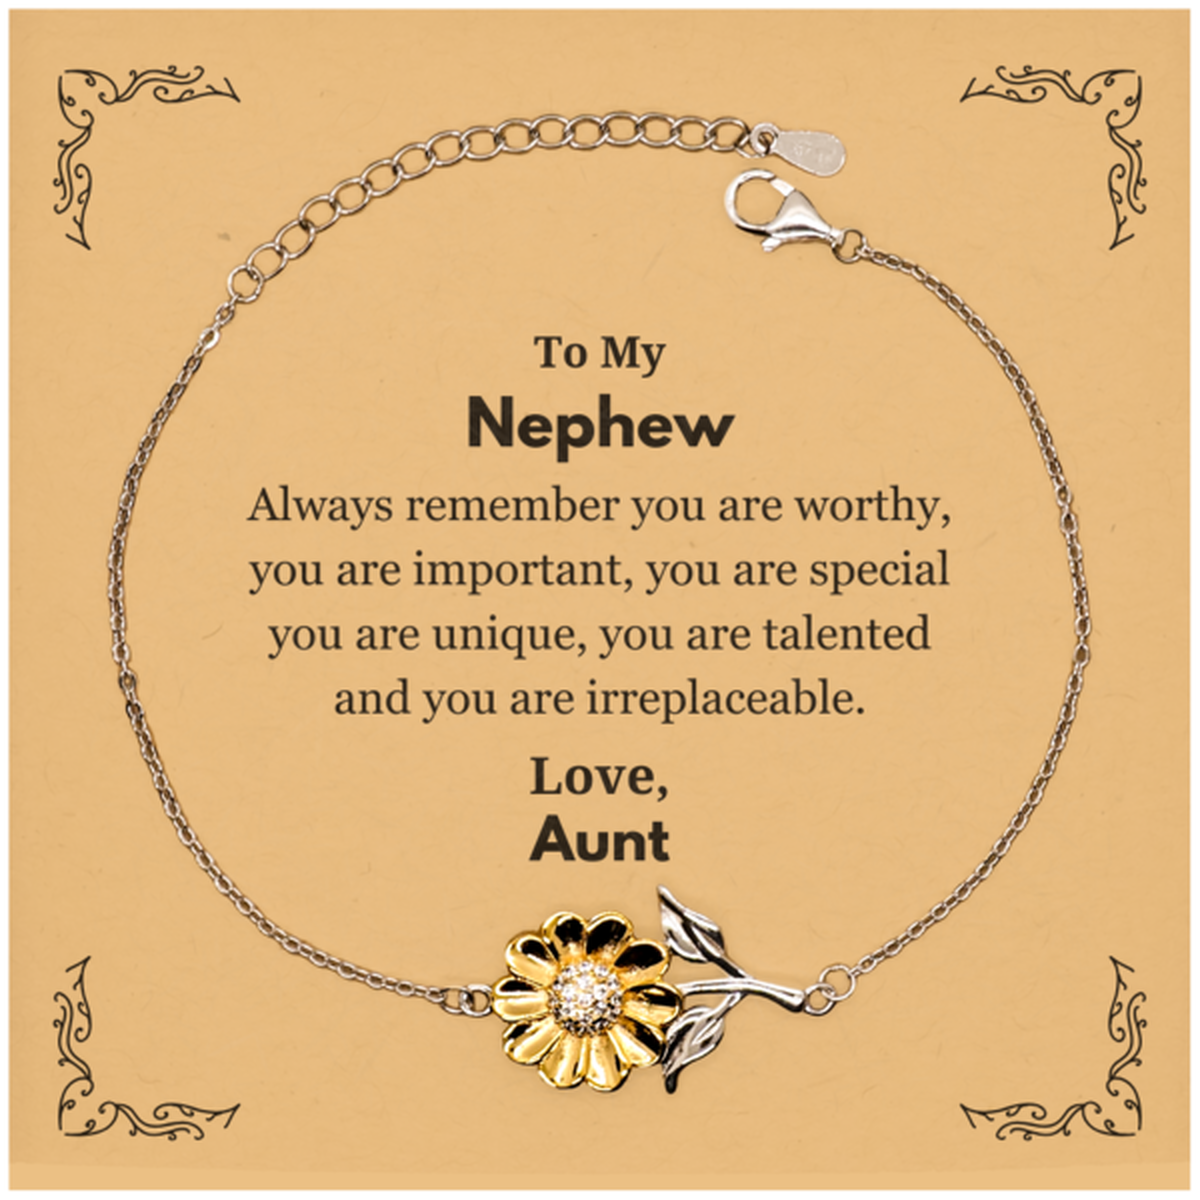 Nephew Birthday Gifts from Aunt, Inspirational Sunflower Bracelet for Nephew Christmas Graduation Gifts for Nephew Always remember you are worthy, you are important. Love, Aunt